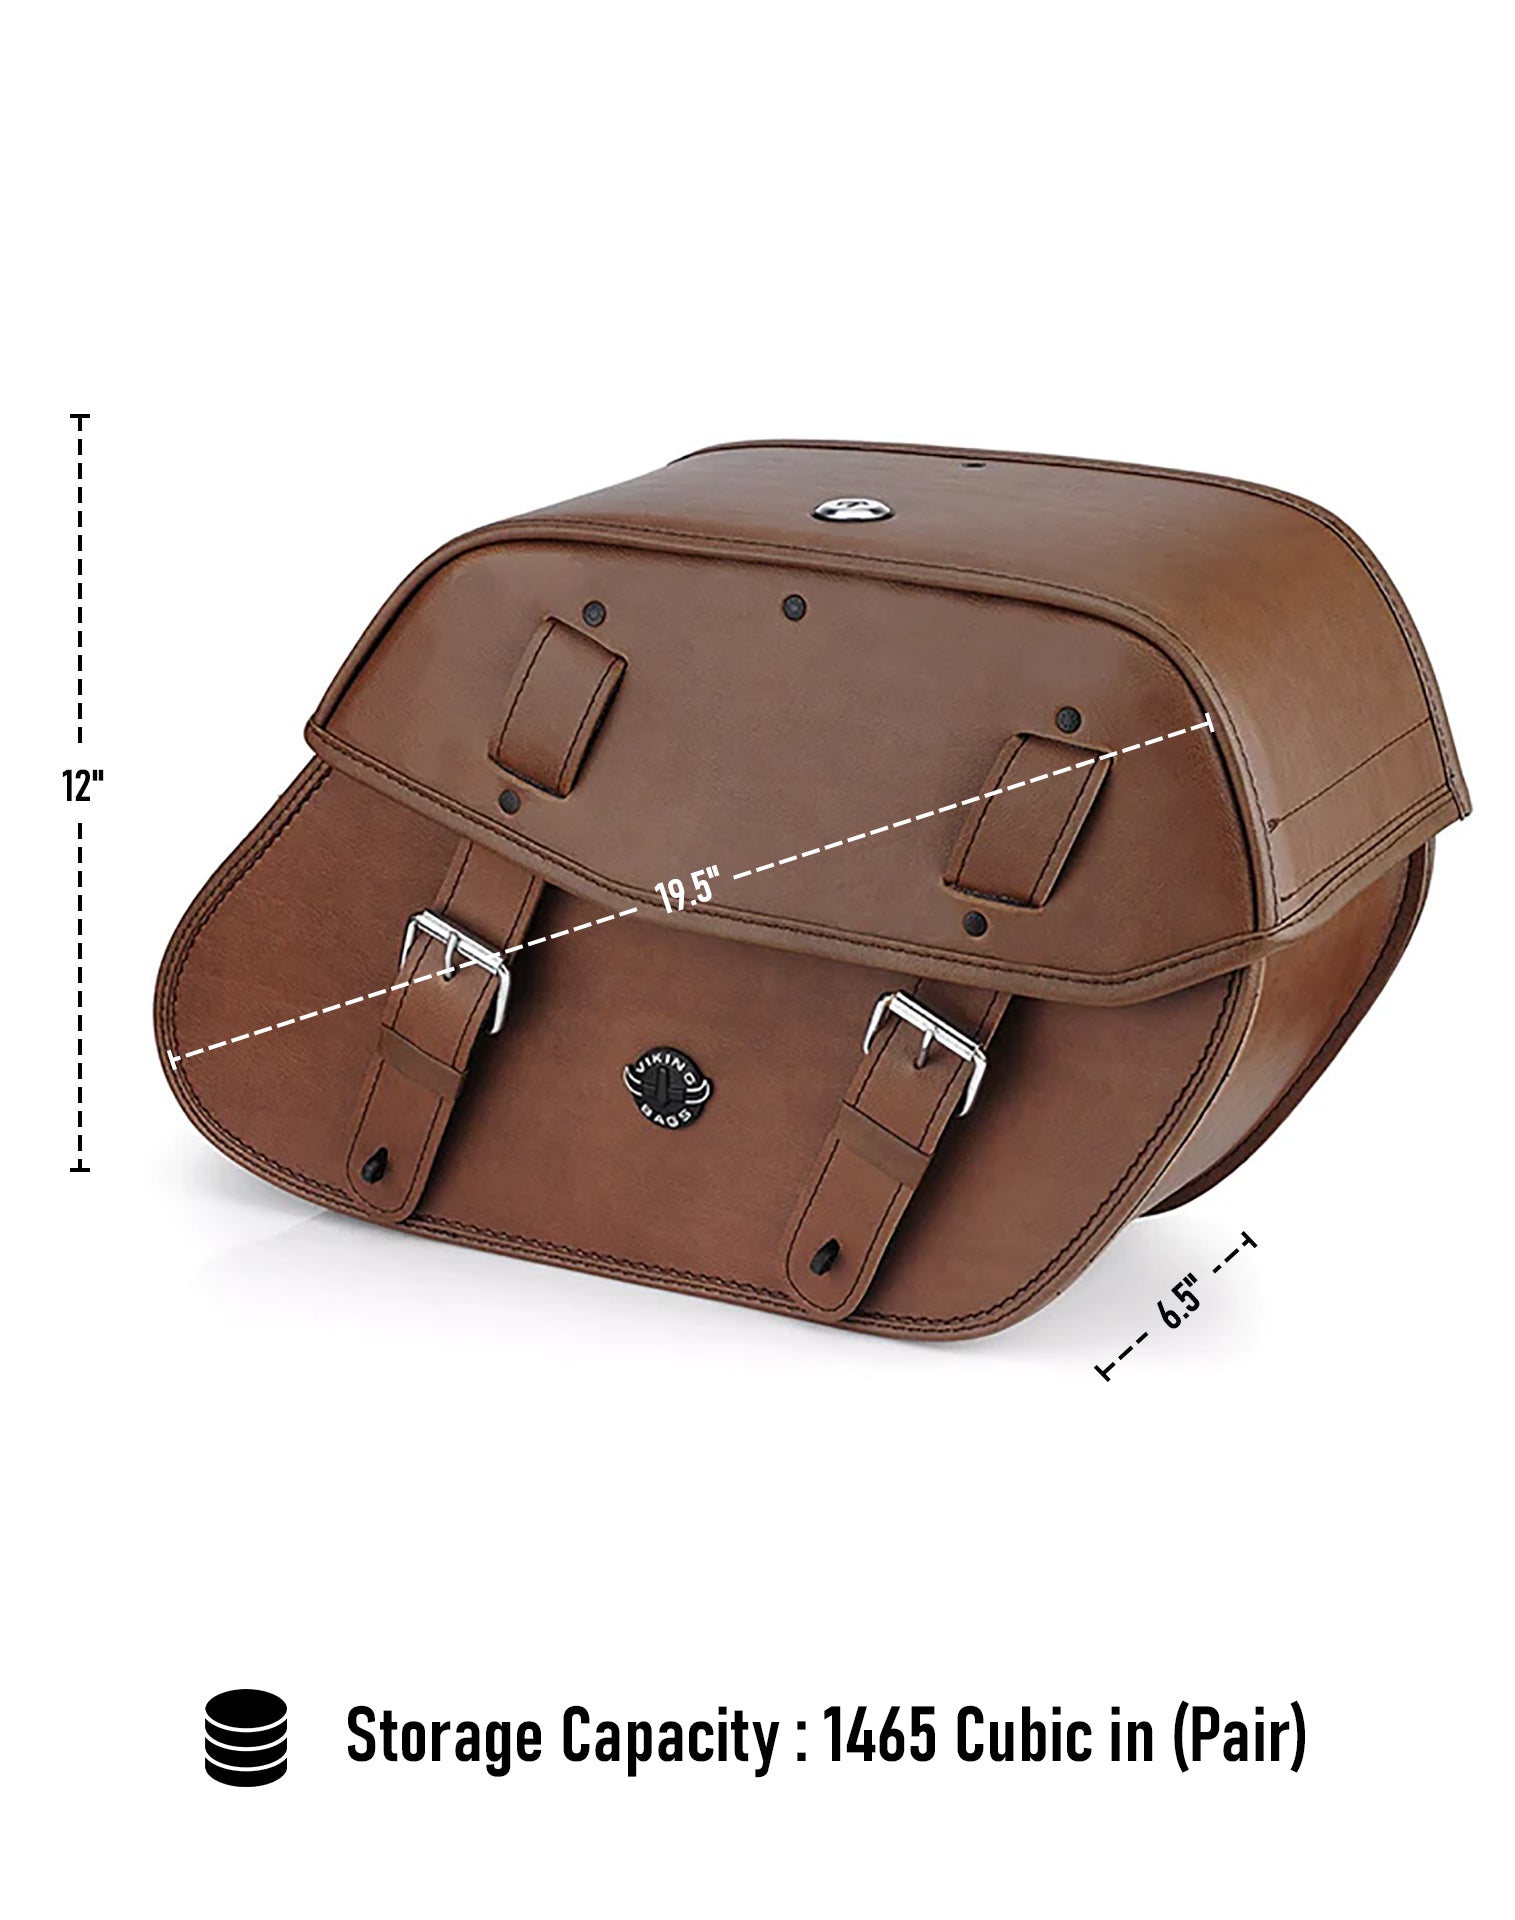 Viking Odin Brown Large Suzuki Boulevard C90 Vl1500 Leather Motorcycle Saddlebags Can Store Your Ridings Gears